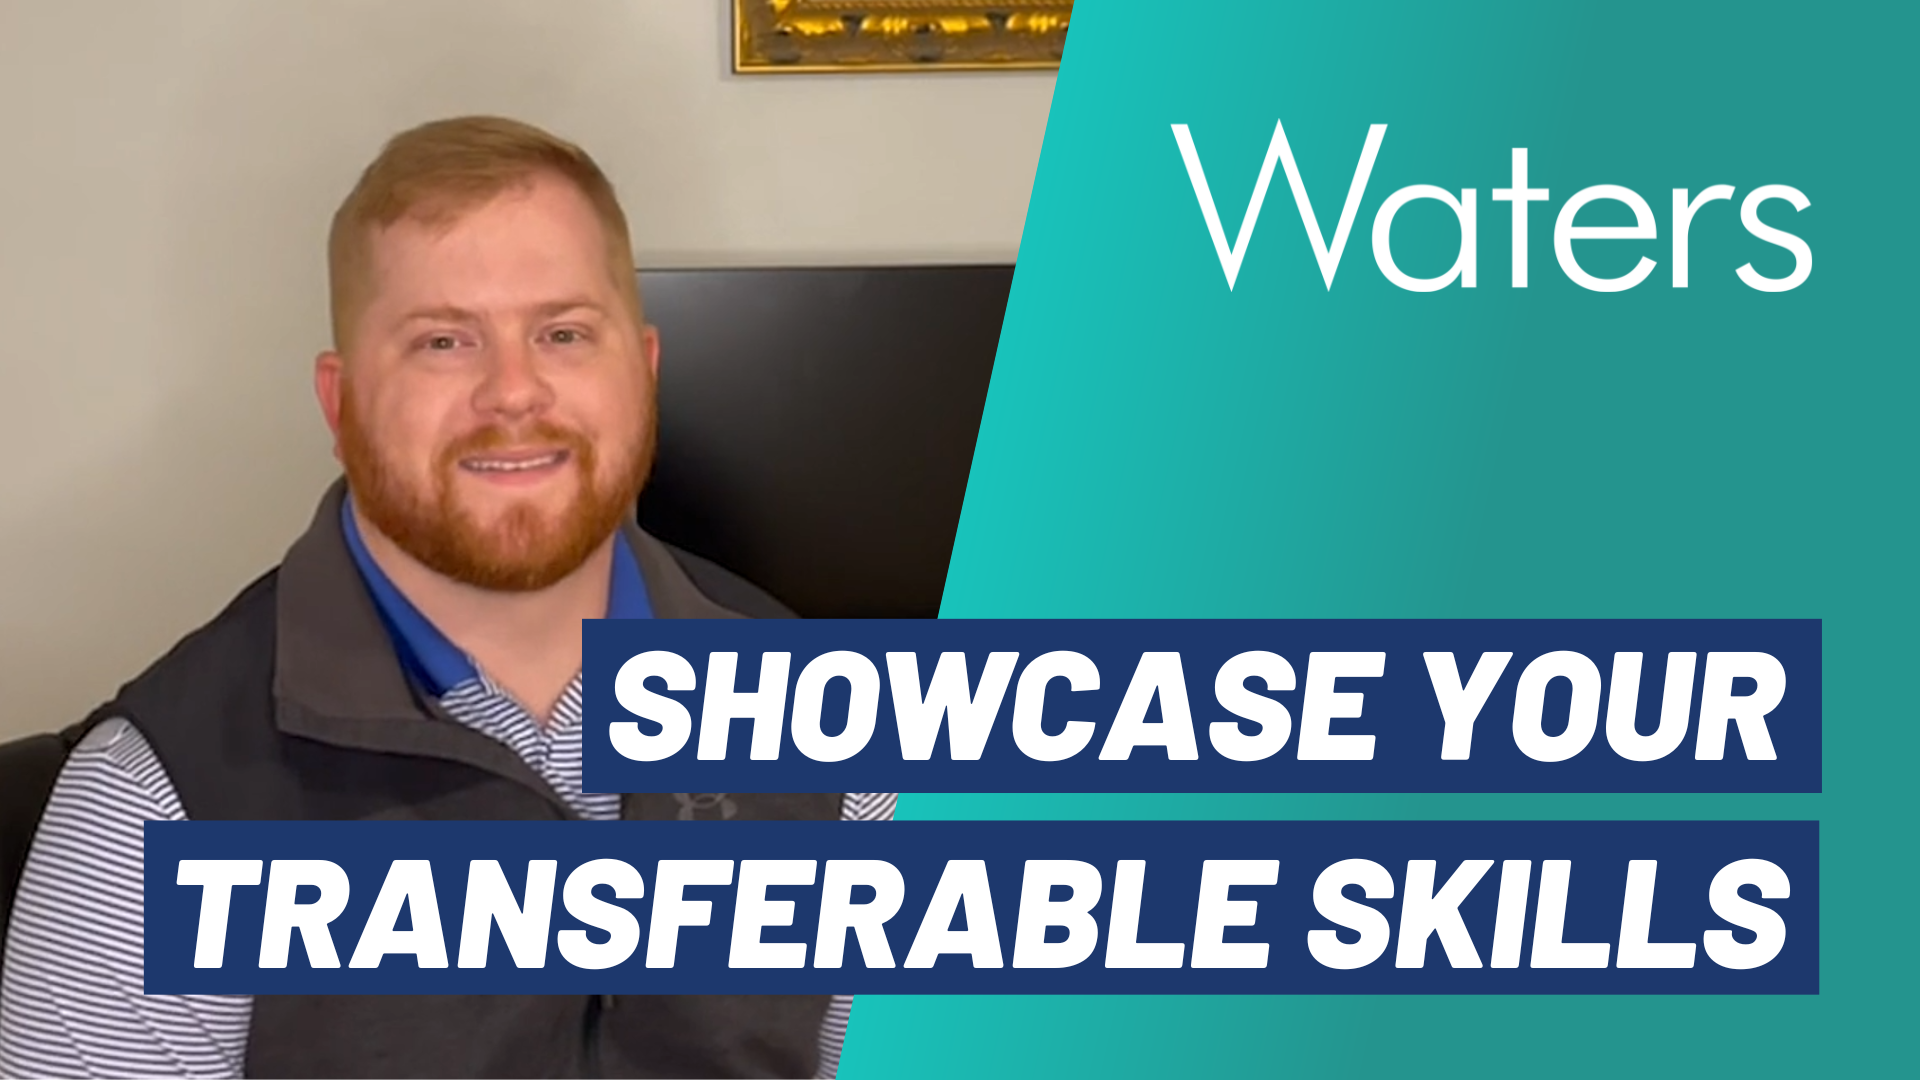 Waters - Meet the recruiter video Showcase your transferable skills